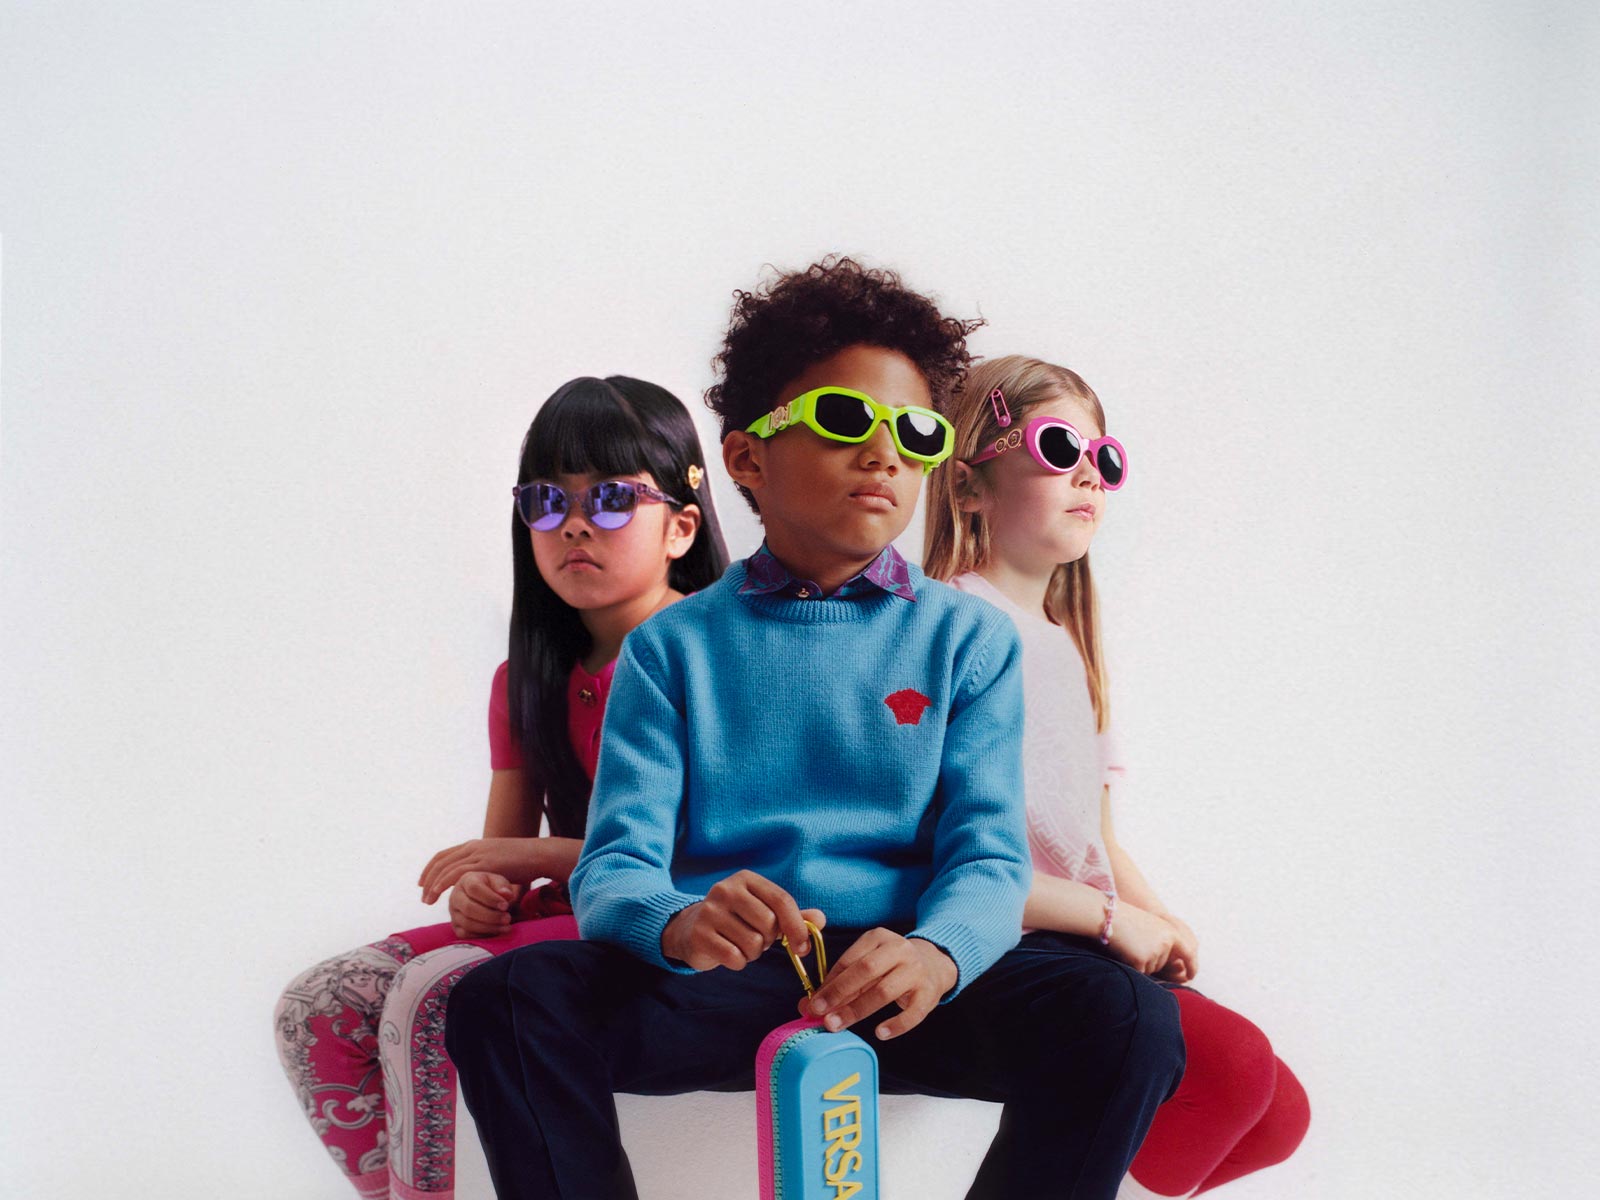 Versace’s first collection designed for children is here